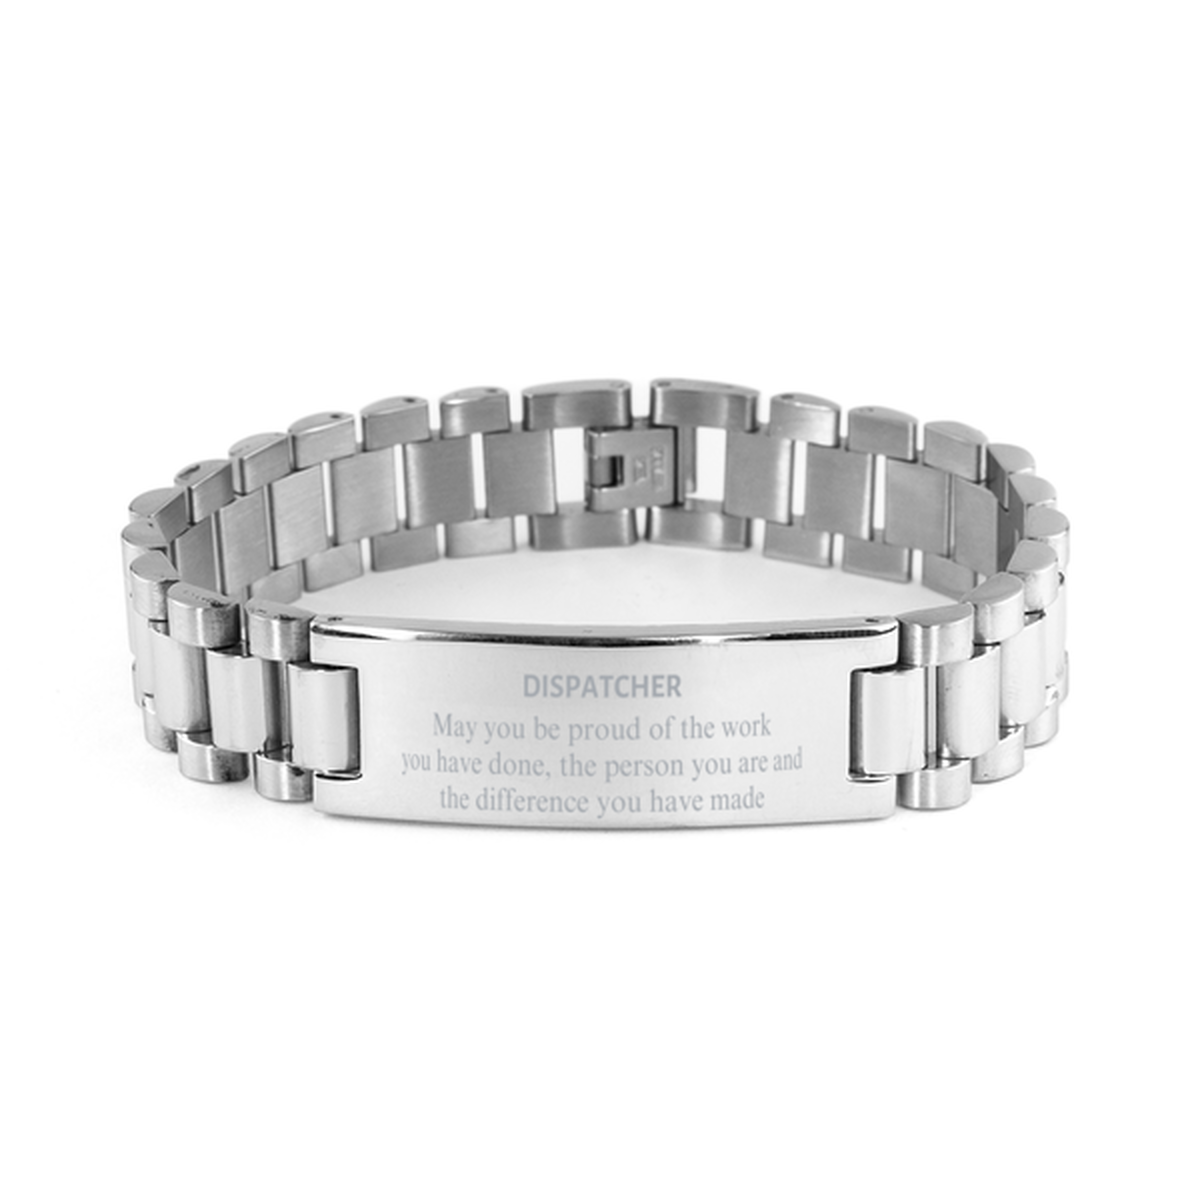 Dispatcher May you be proud of the work you have done, Retirement Dispatcher Ladder Stainless Steel Bracelet for Colleague Appreciation Gifts Amazing for Dispatcher